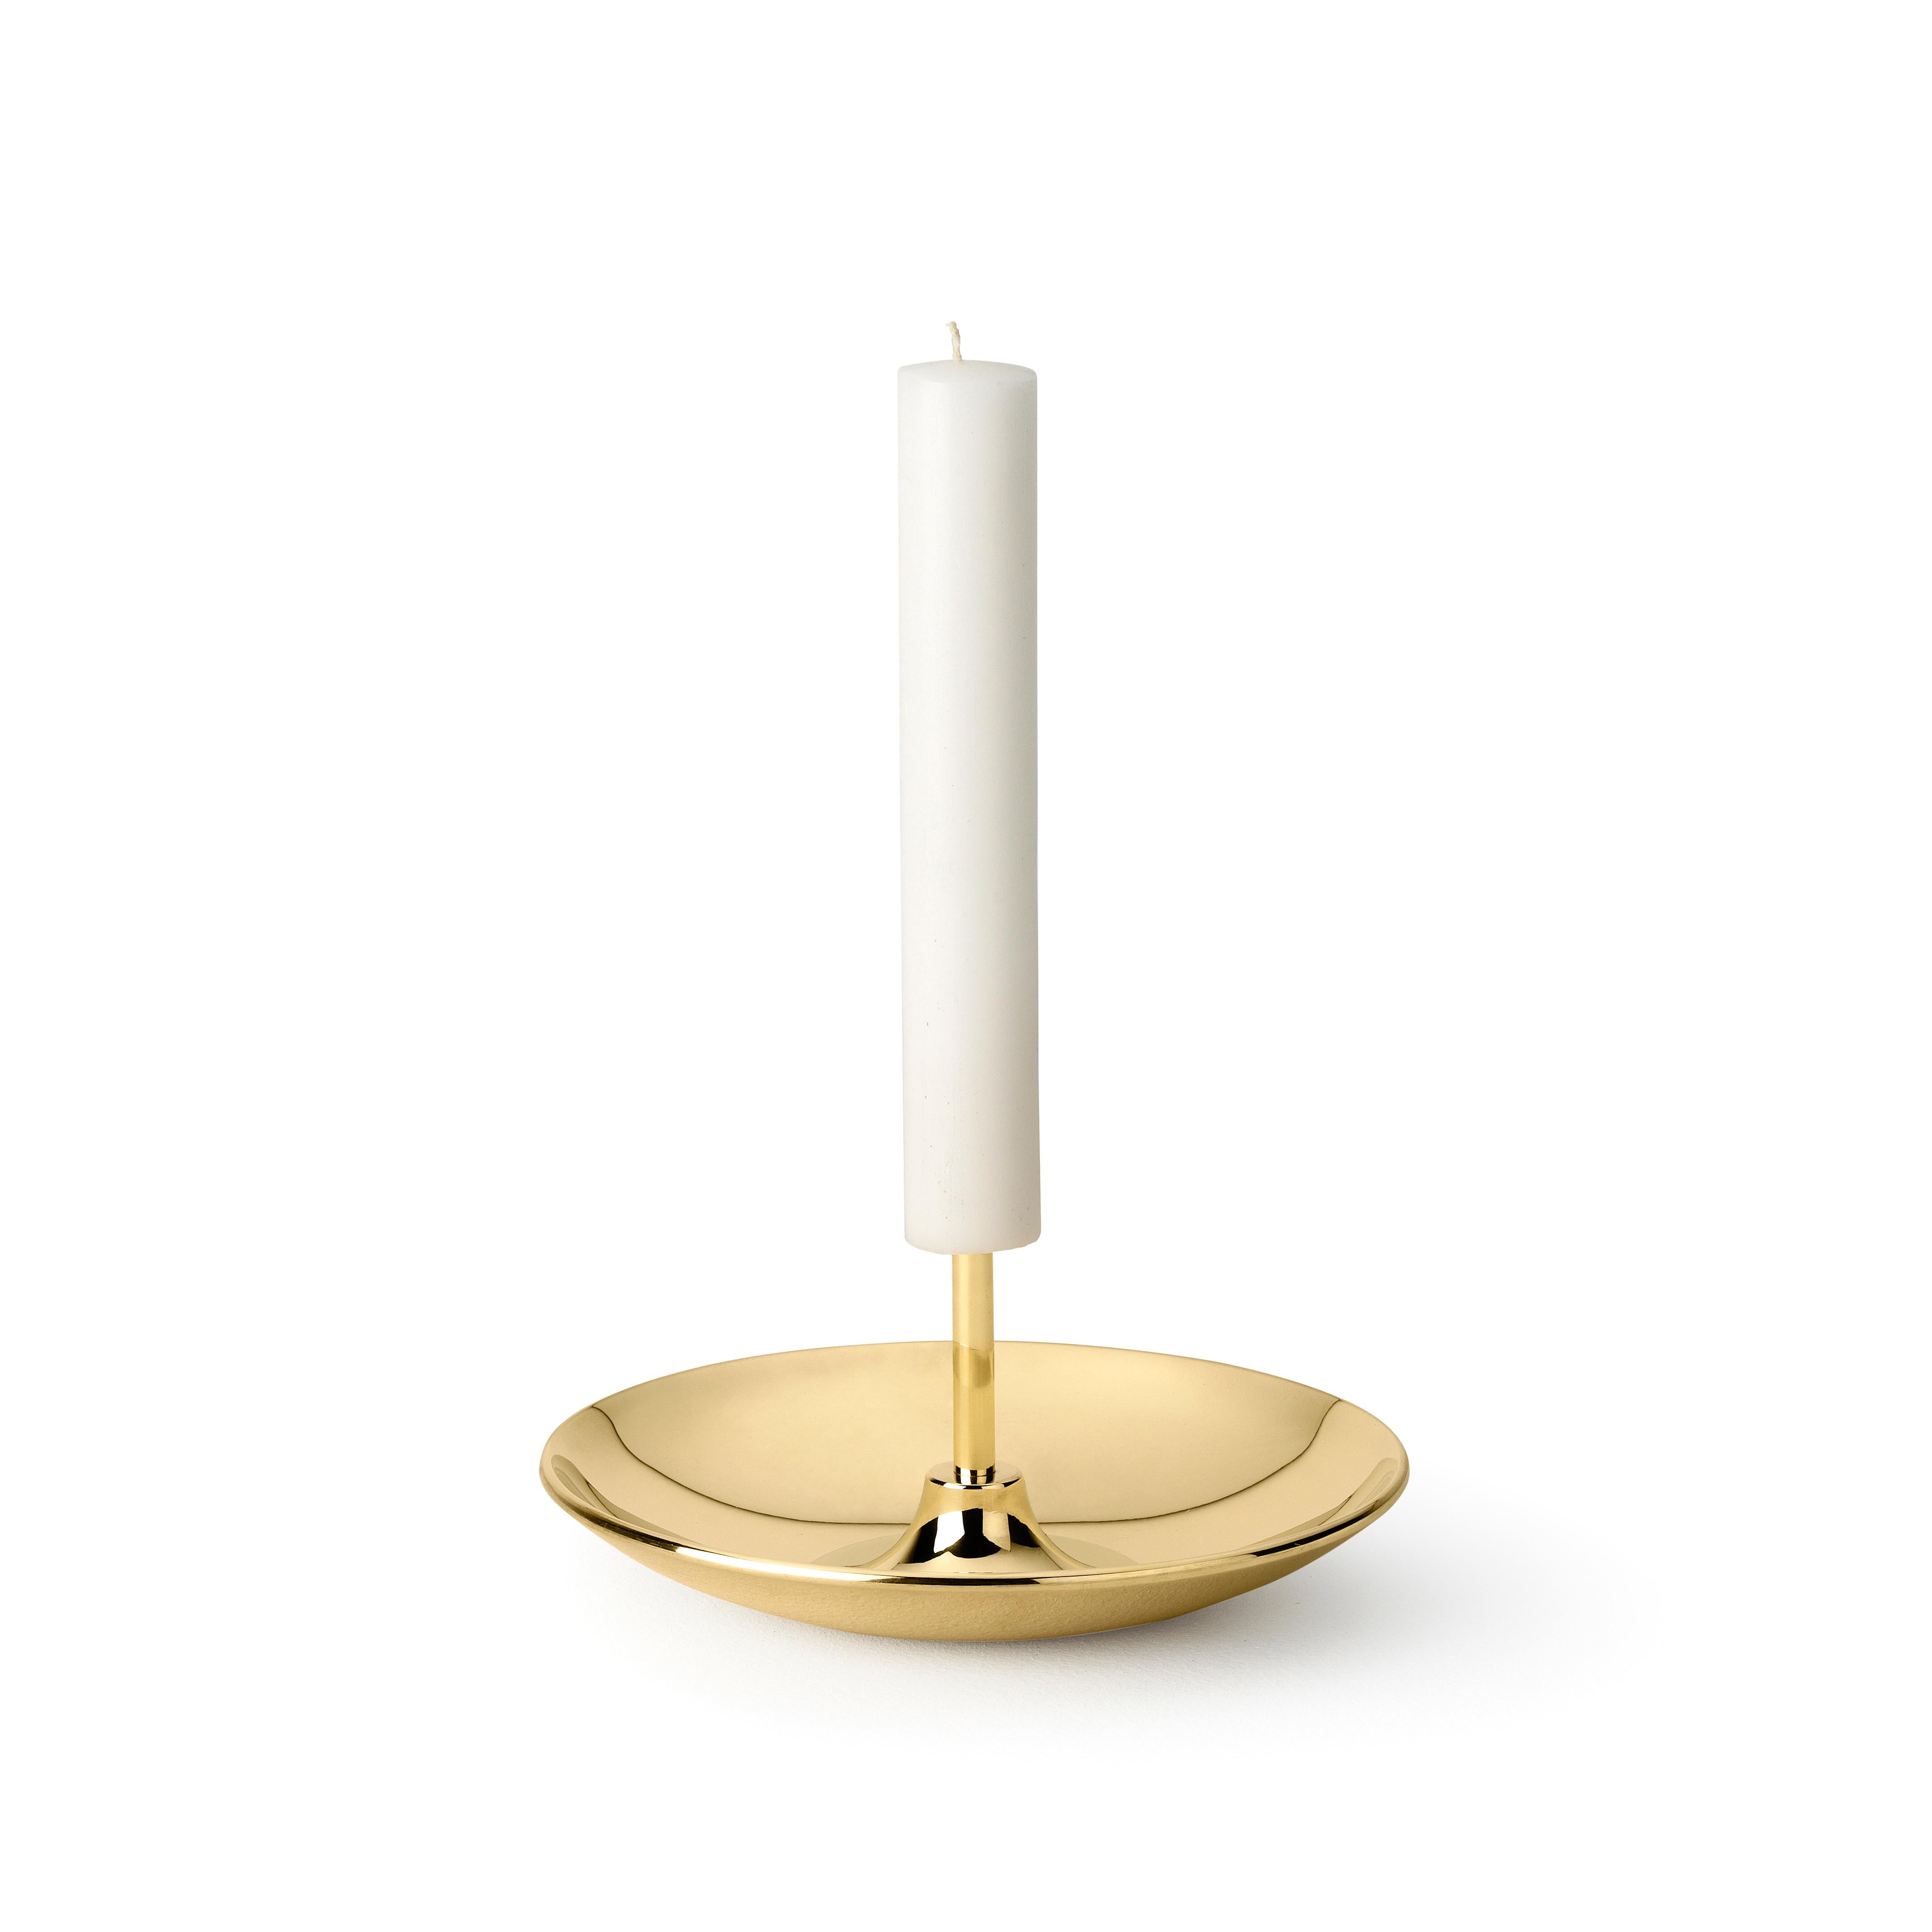 Candlestick in brass. The push pin as a representation of the struggle for achievement day by day, months by months, till we conquer. The push pin sconce is embellished with engravings and a shiny brass finish. 

Materials:
Brass.